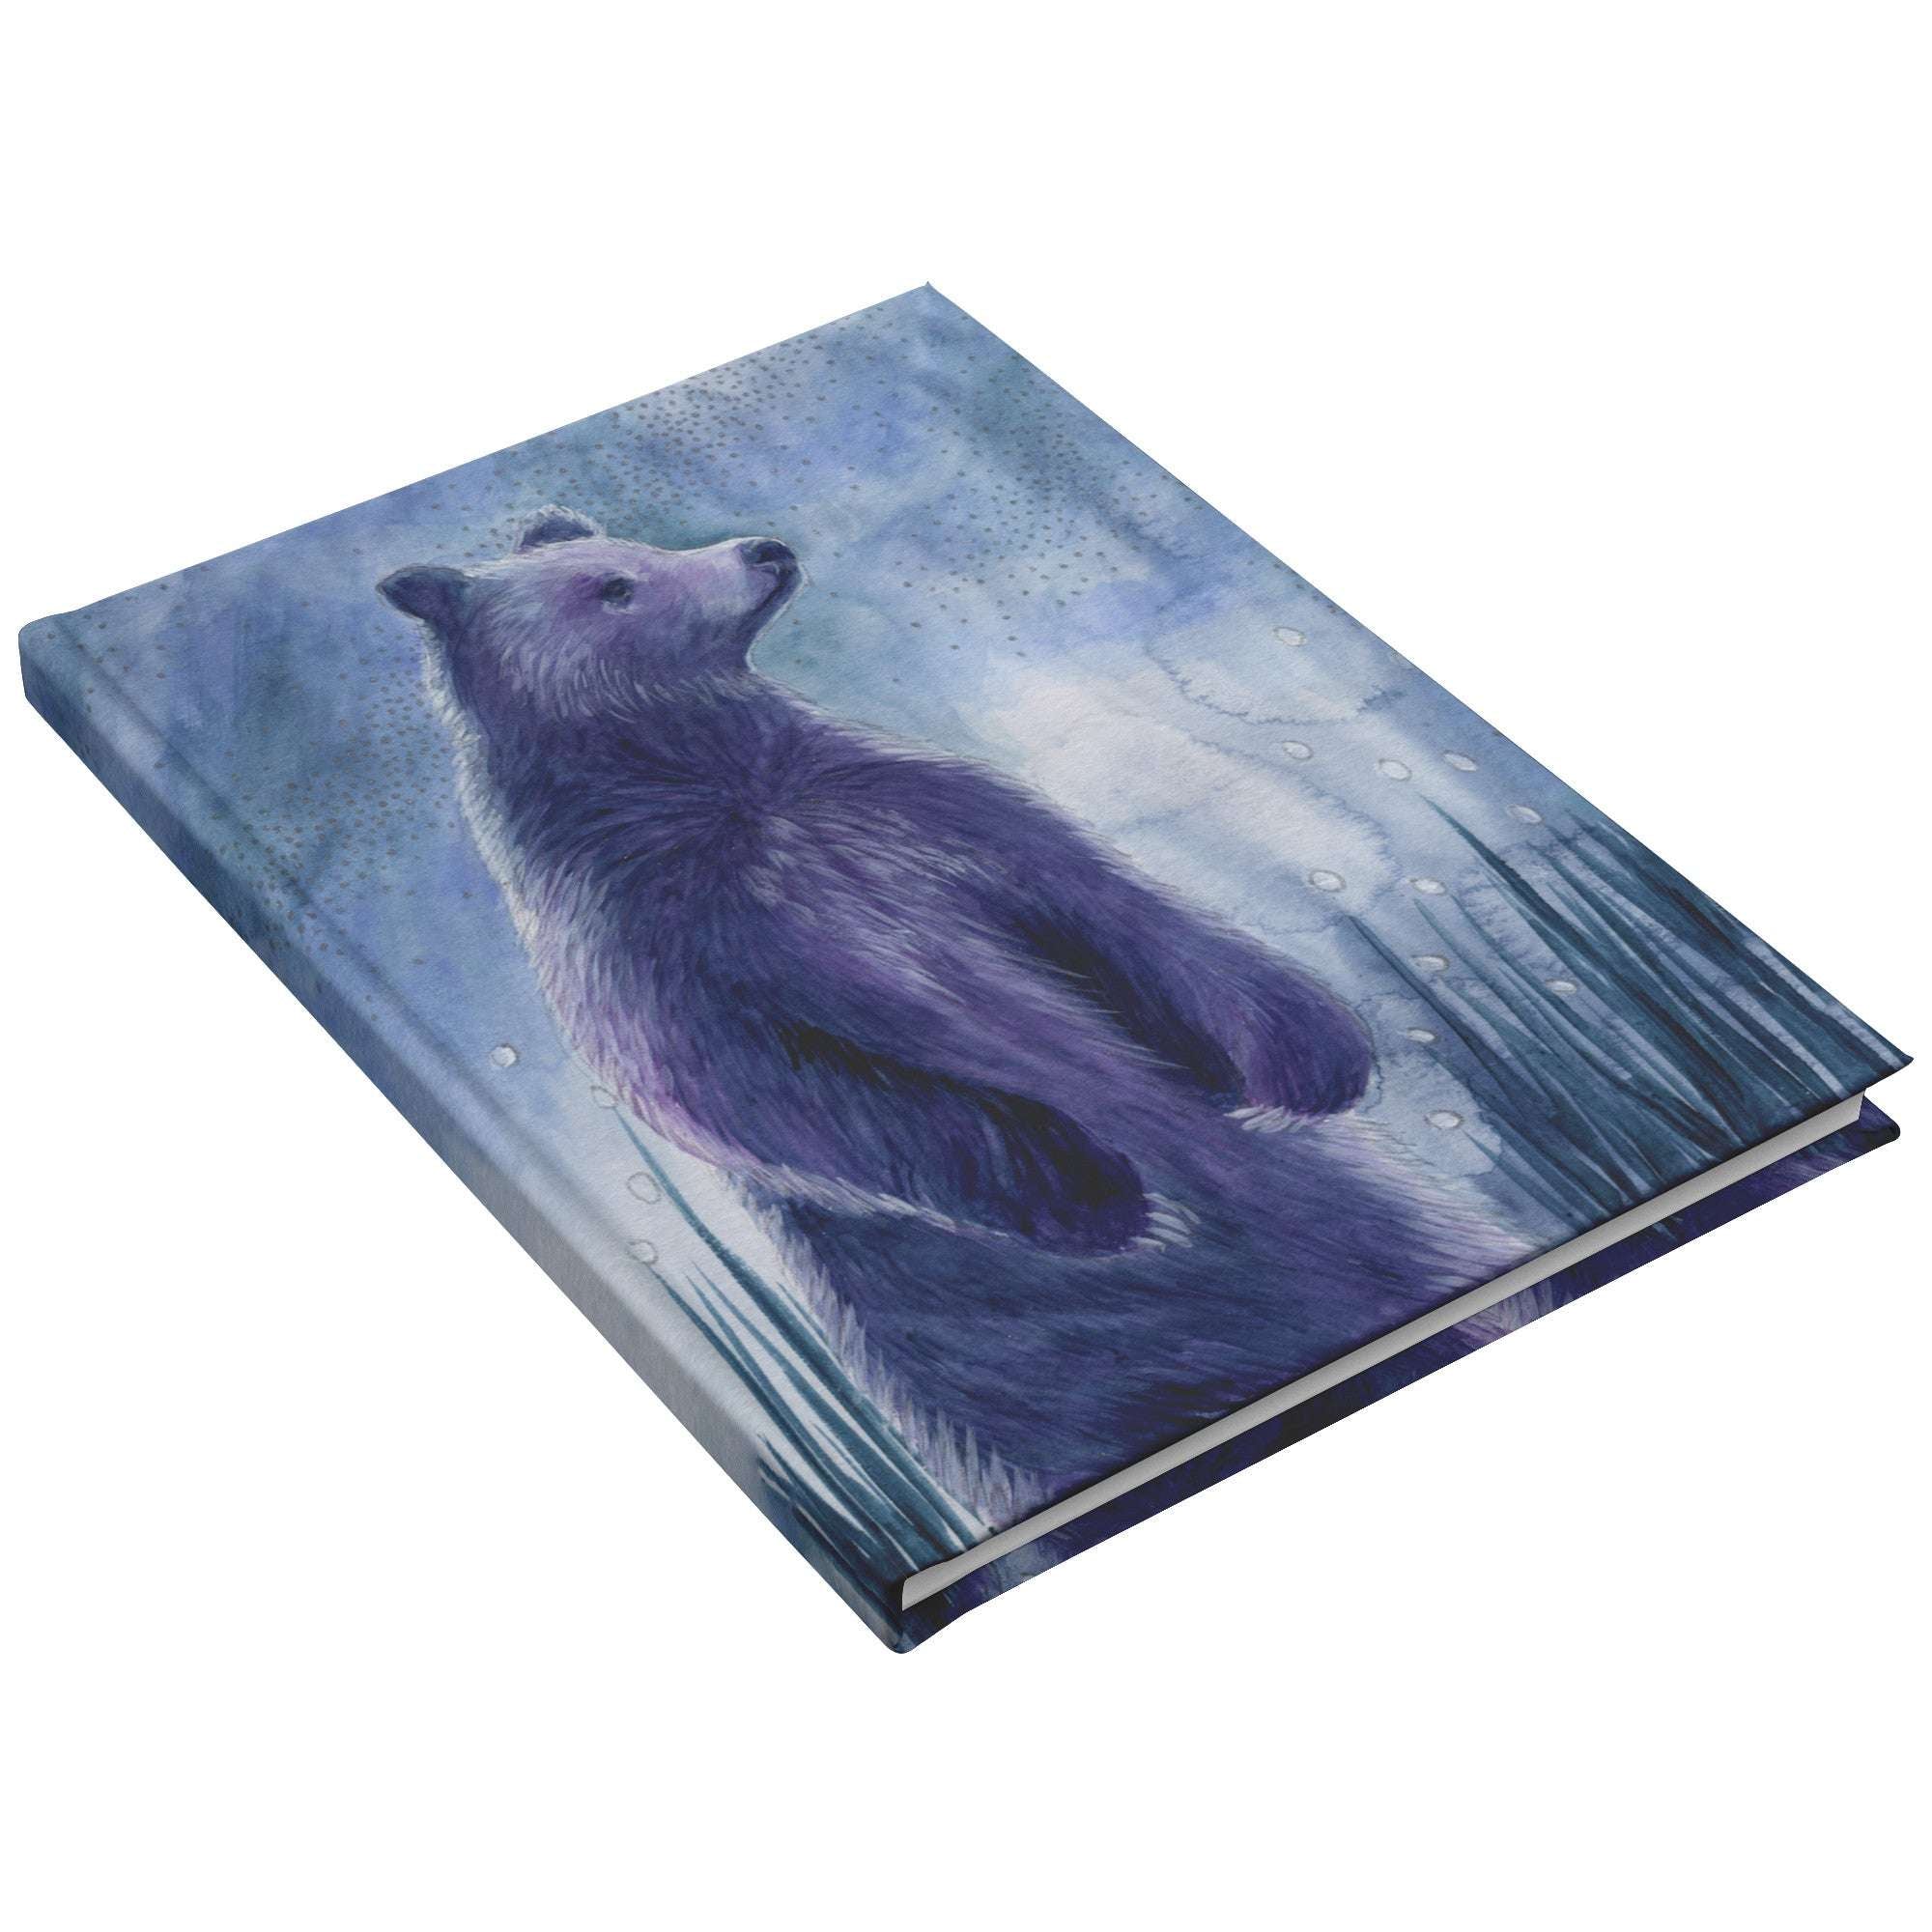 A Celestial Bear Journal featuring an illustration of a purple, whimsical bear standing in a blue, mystical forest setting.